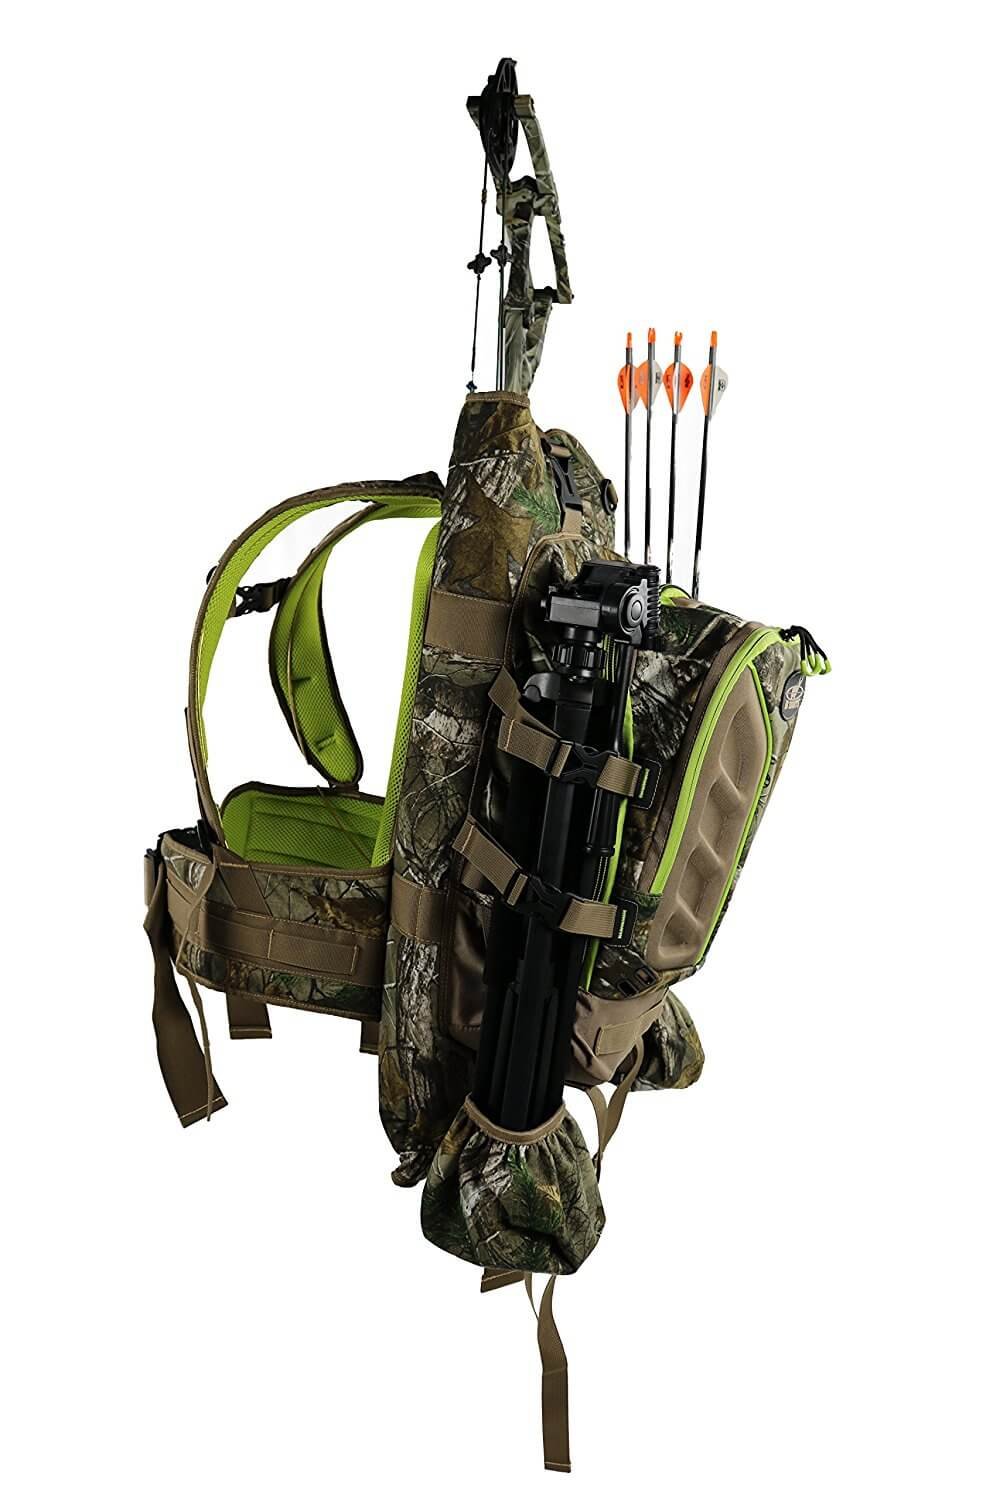 Best Bow Hunting Backpack - #4 In Sights Realtree Xtra Multi Pack - Side View